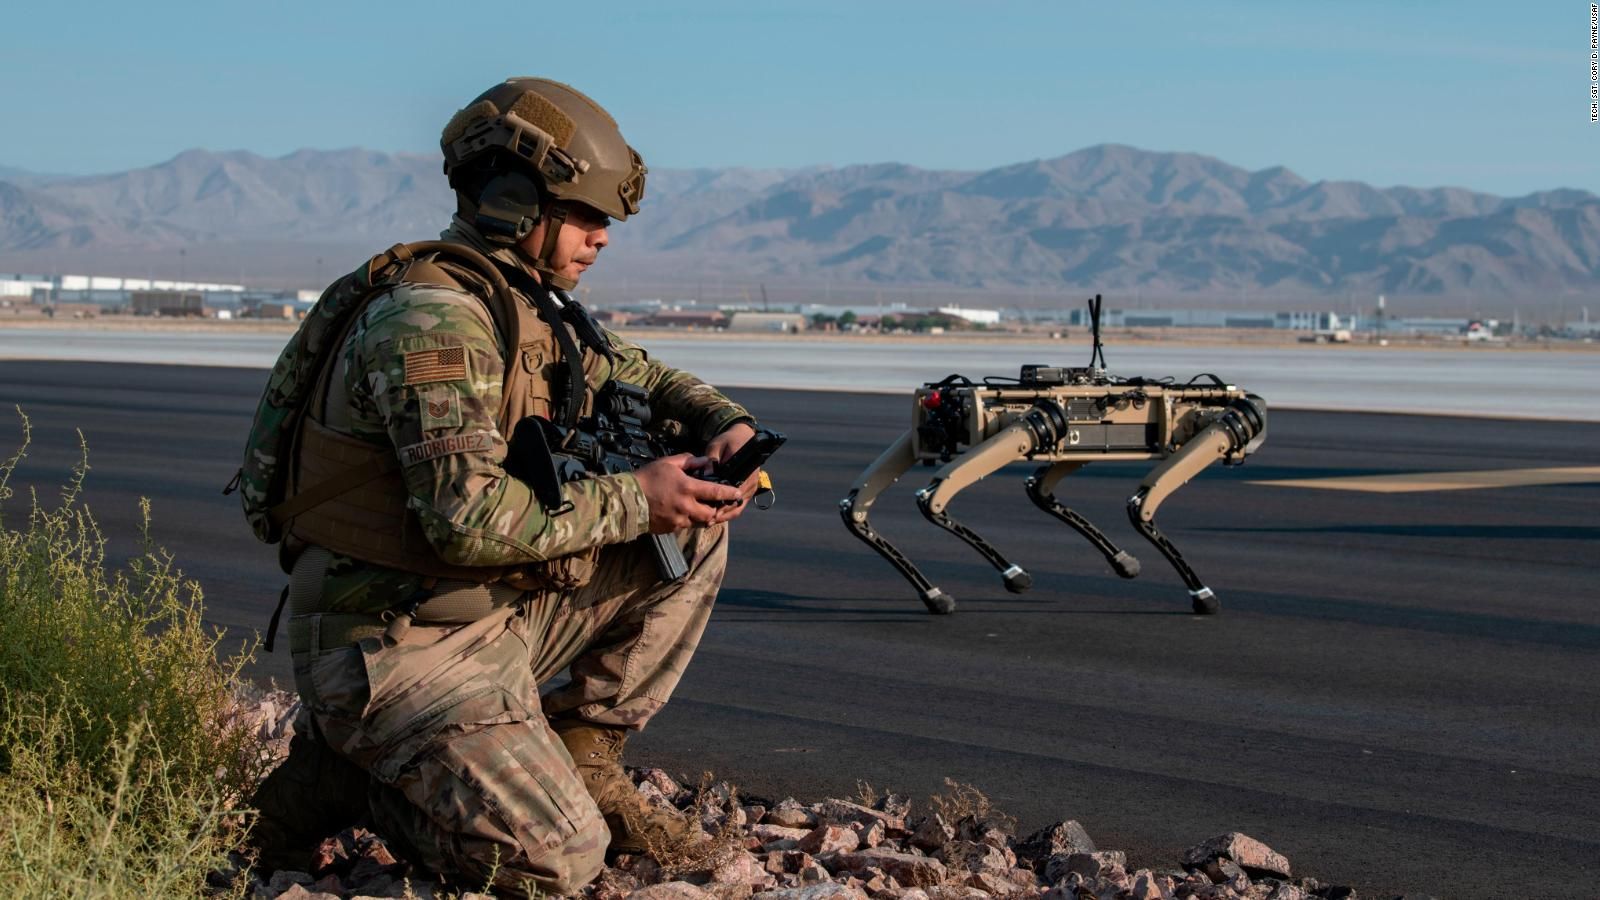 Robot dogs join US Air Force exercise